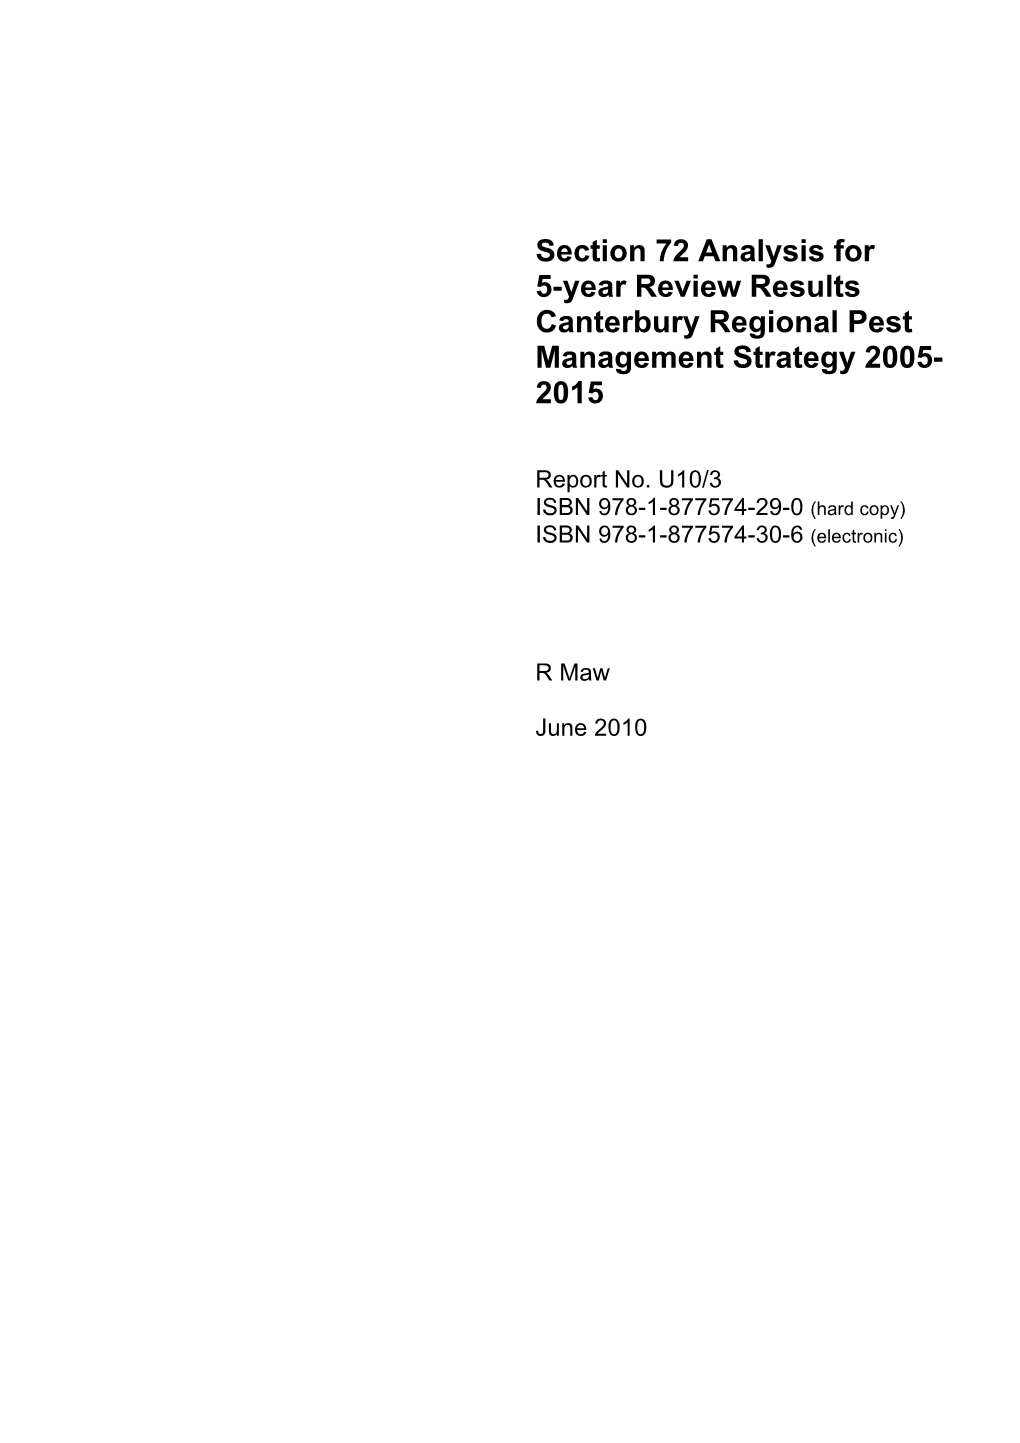 Section 72 Analysis for 5-Year Review Results Canterbury Regional Pest Management Strategy 2005- 2015